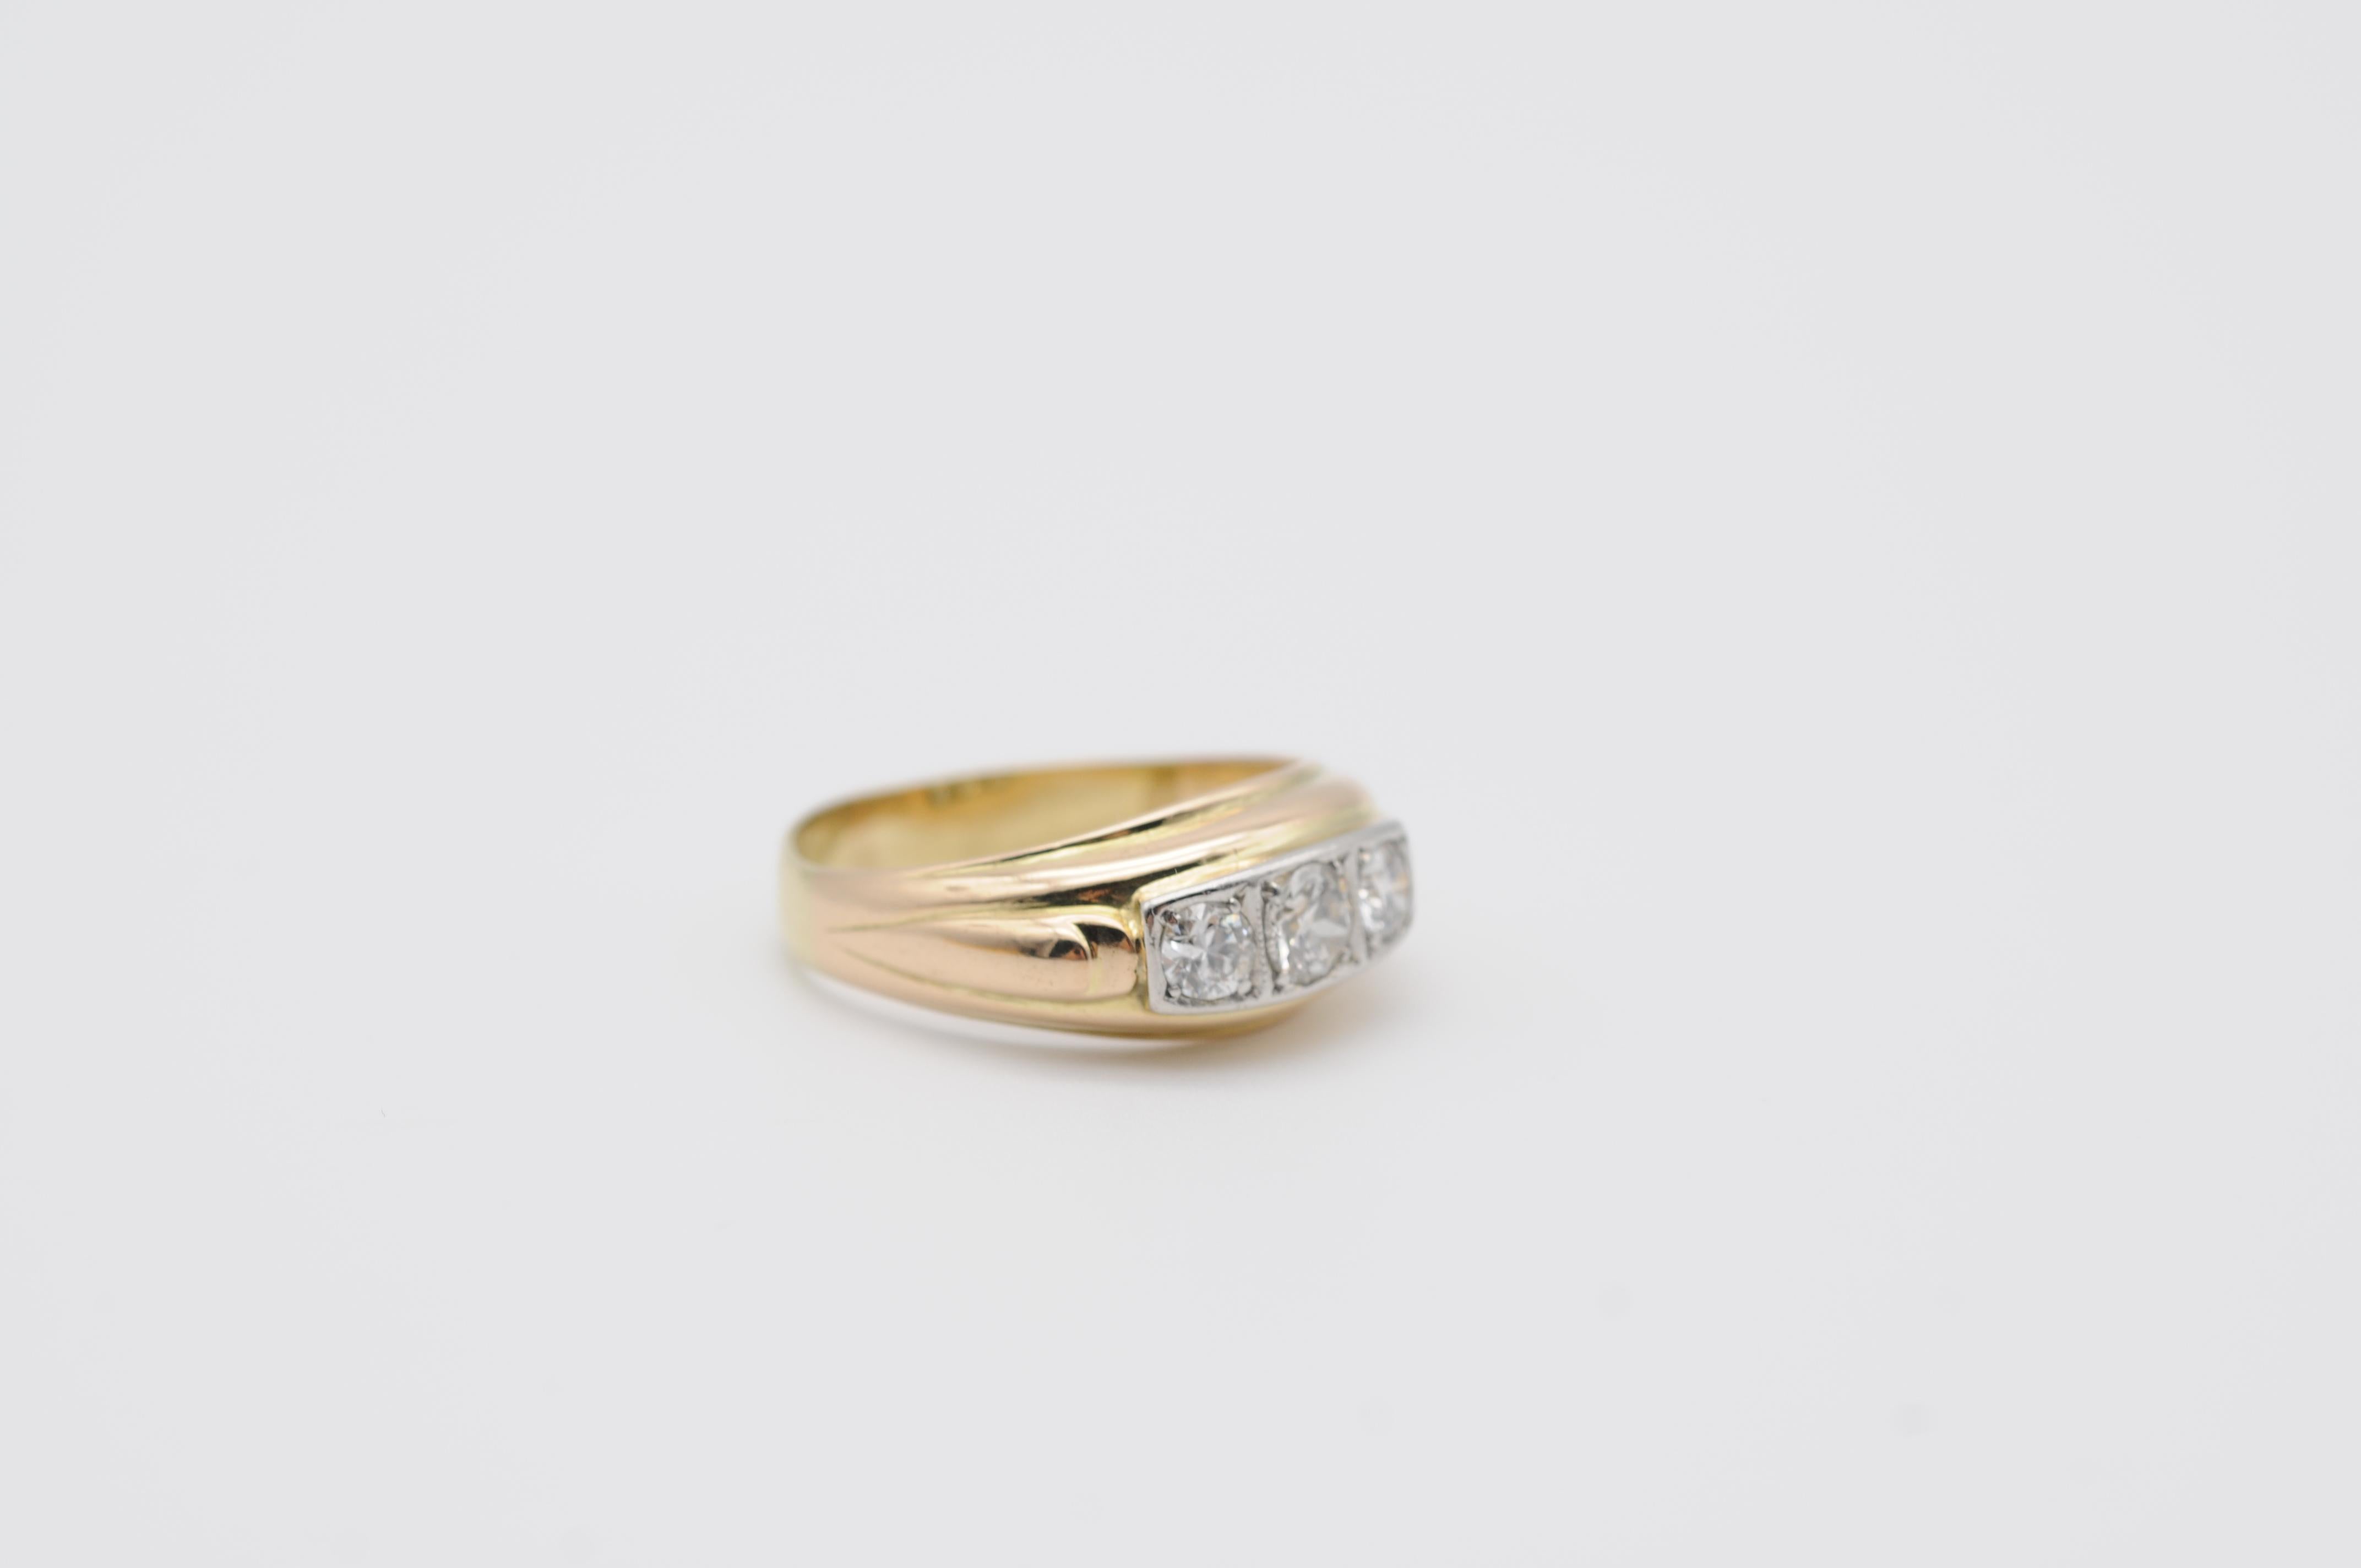 Brilliant Cut 14k Yellow Gold Diamond Band Ring of 0.70 Carat For Sale